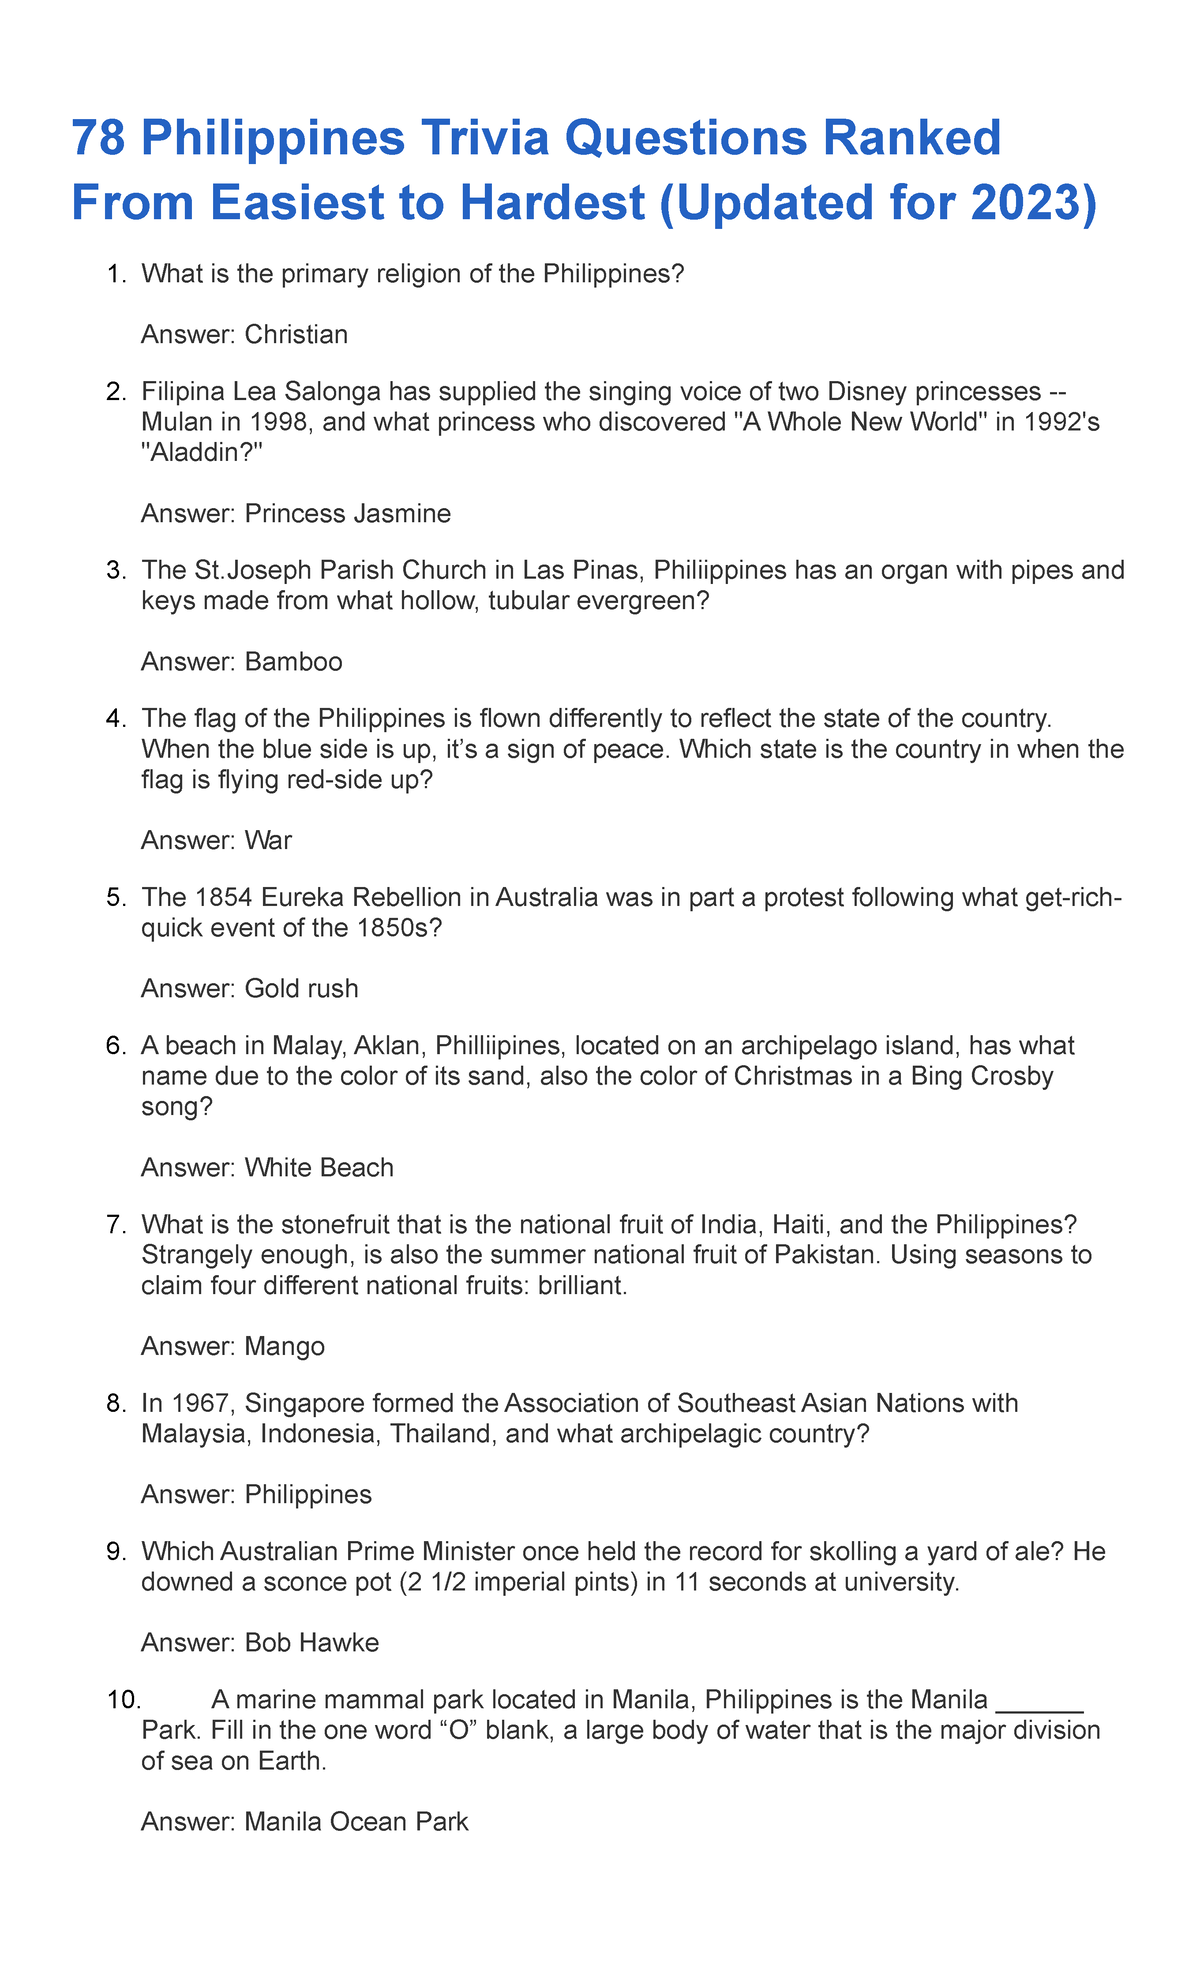 78-philippines-trivia-questions-ranked-from-easiest-to-hardest-which